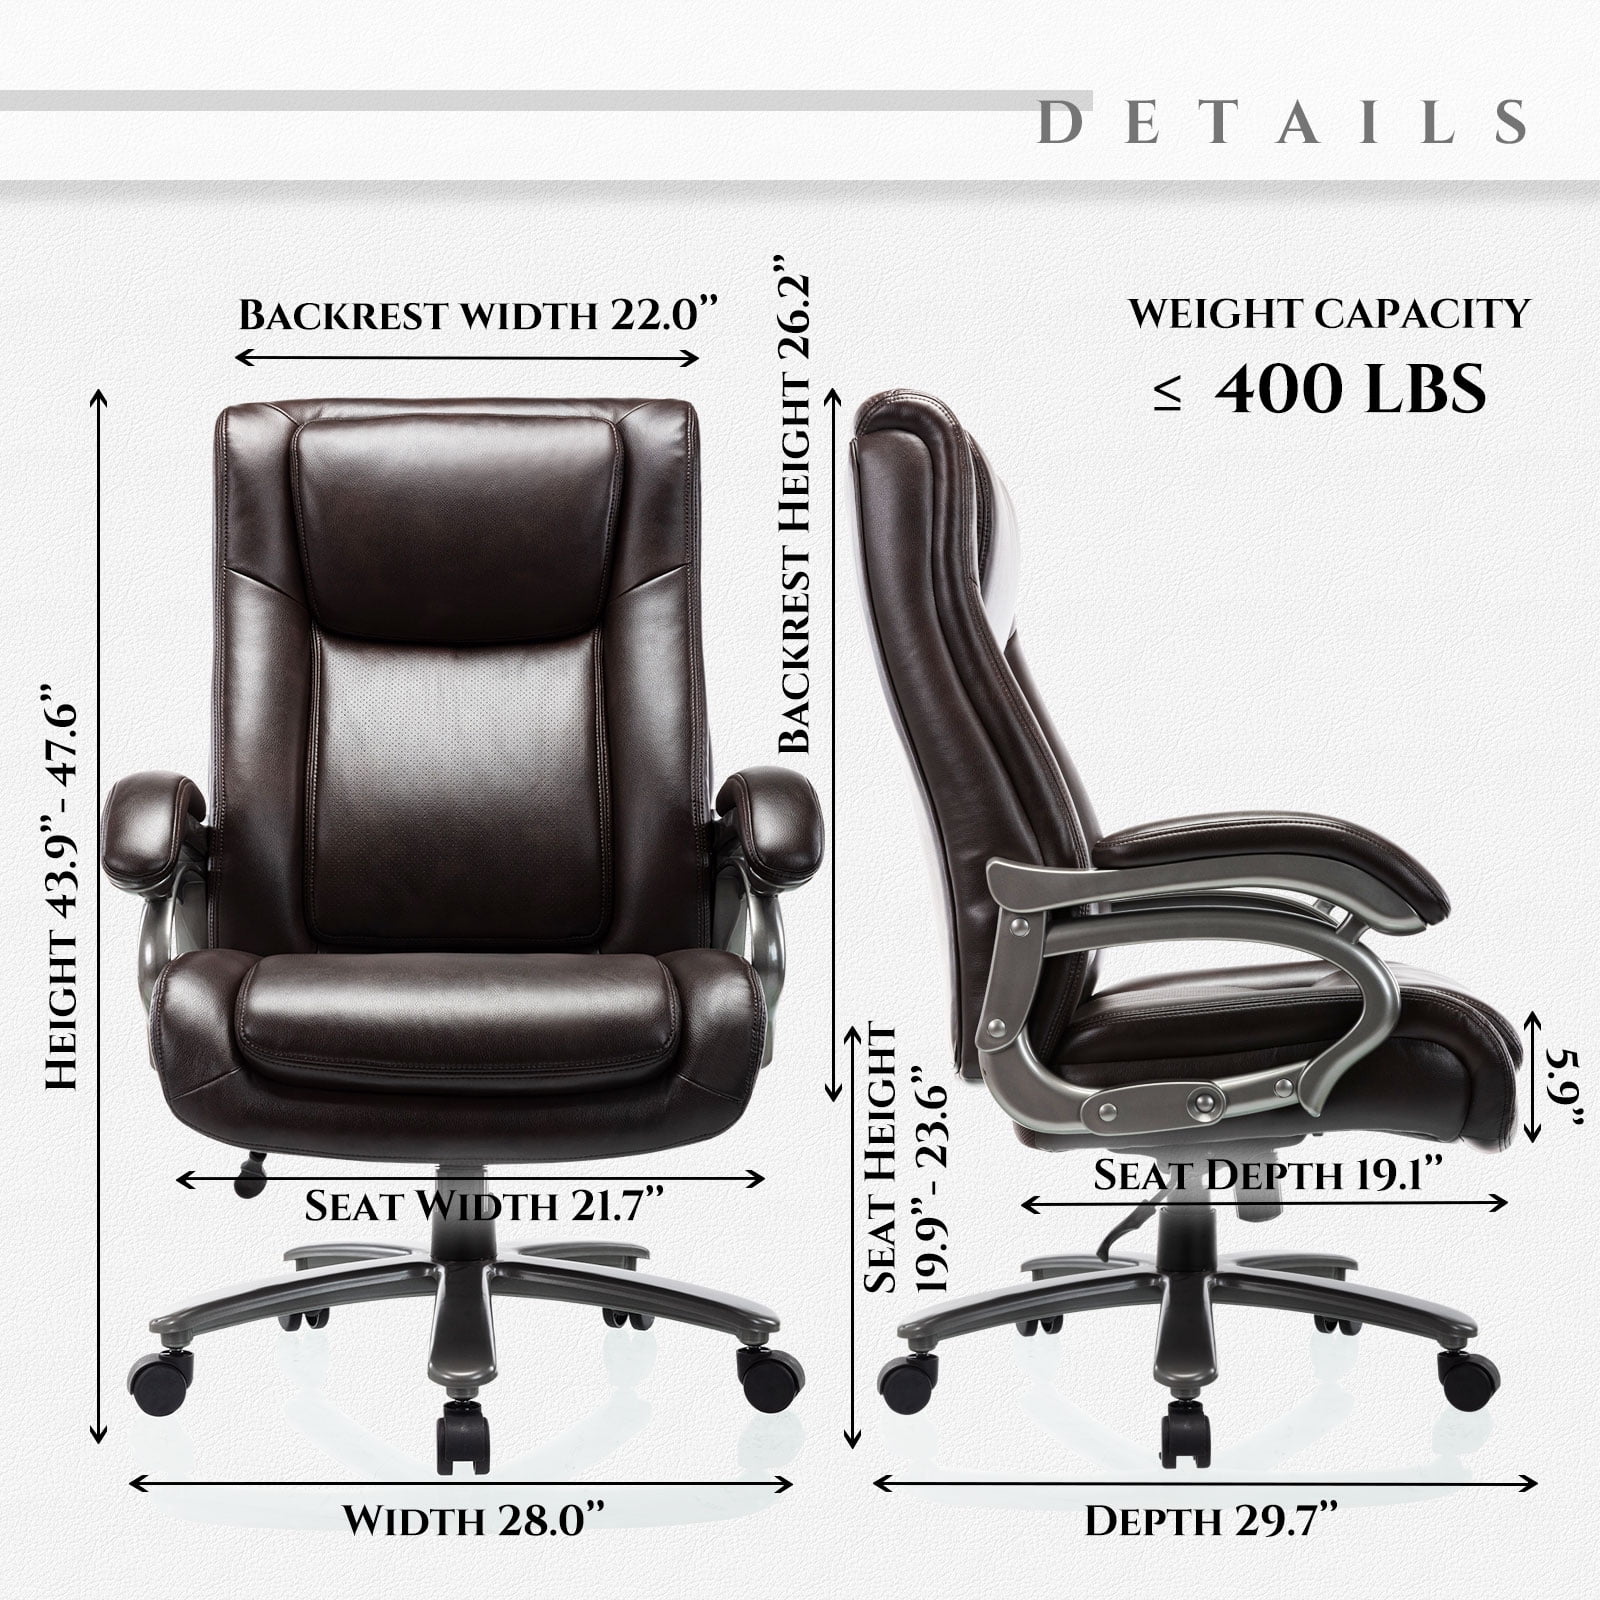 Snugway Big and tall High Back Office Chair with Headrest and 3D